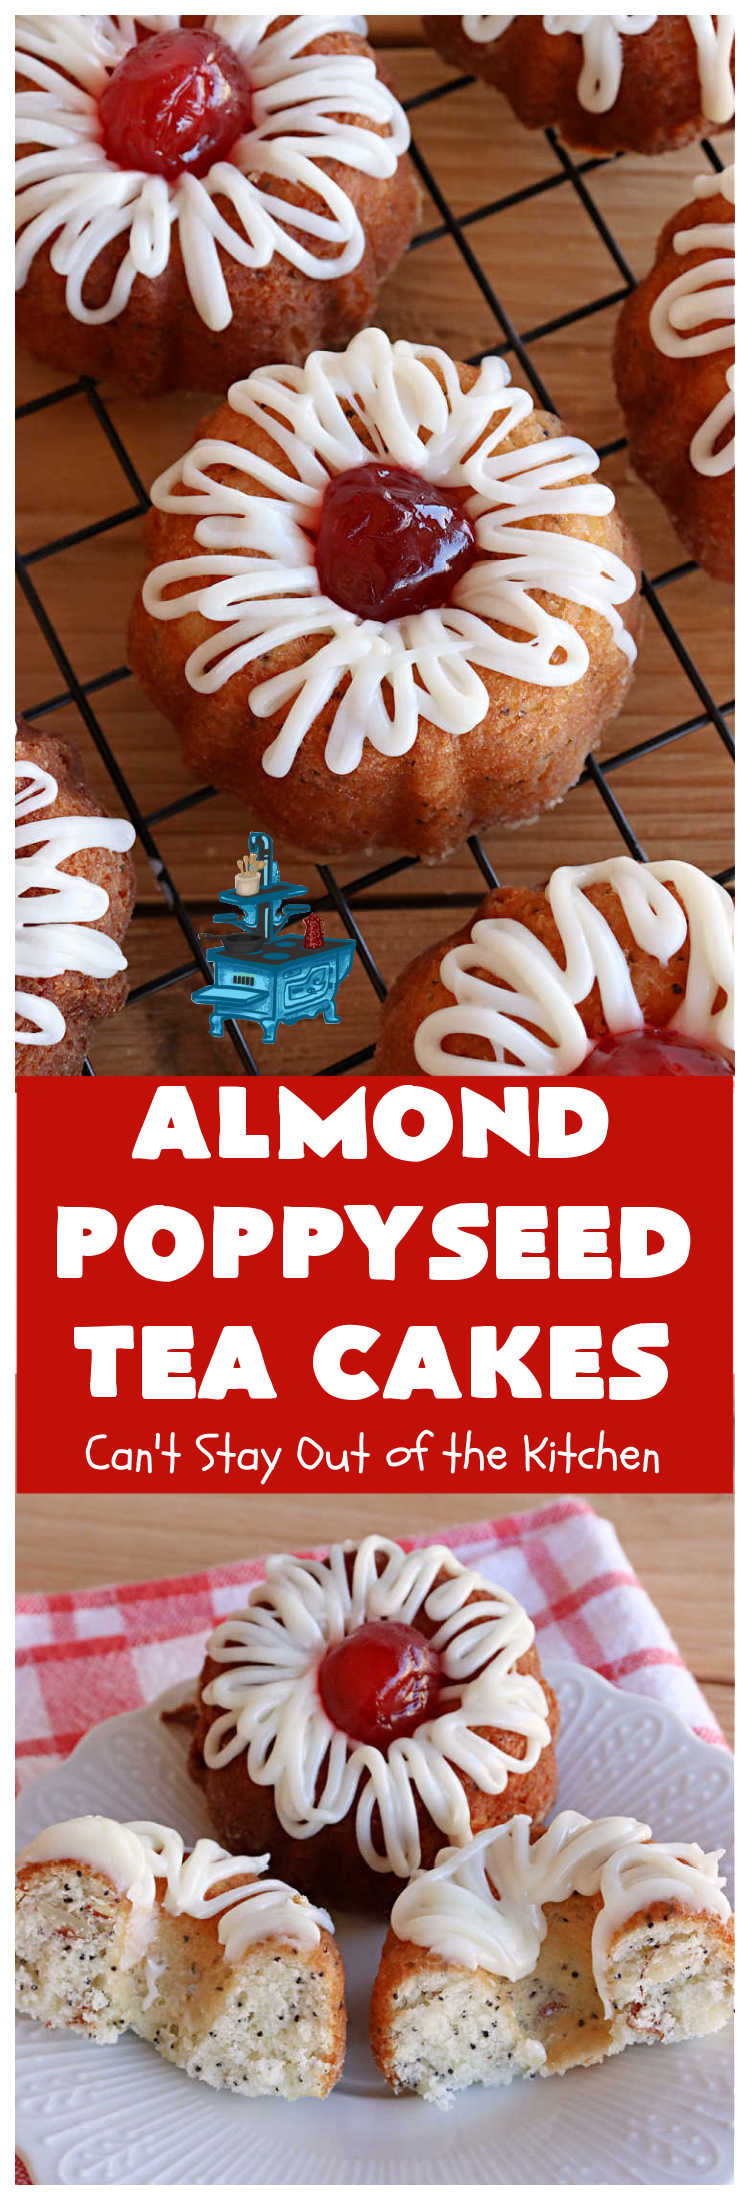 Almond Poppyseed Tea Cakes | Can't Stay Out of the Kitchen | these amazing #TeaCakes are irresistible & mouthwatering. They include both #almond flavoring & #almonds along with #poppyseeds to give flavor & texture to the #cake. These are fantastic for #holiday or #Christmas parties, but delightful enough to make all year long. Prepare to drool over every bite! #dessert #HolidayDessert #AlmondPoppyseedTeaCakes